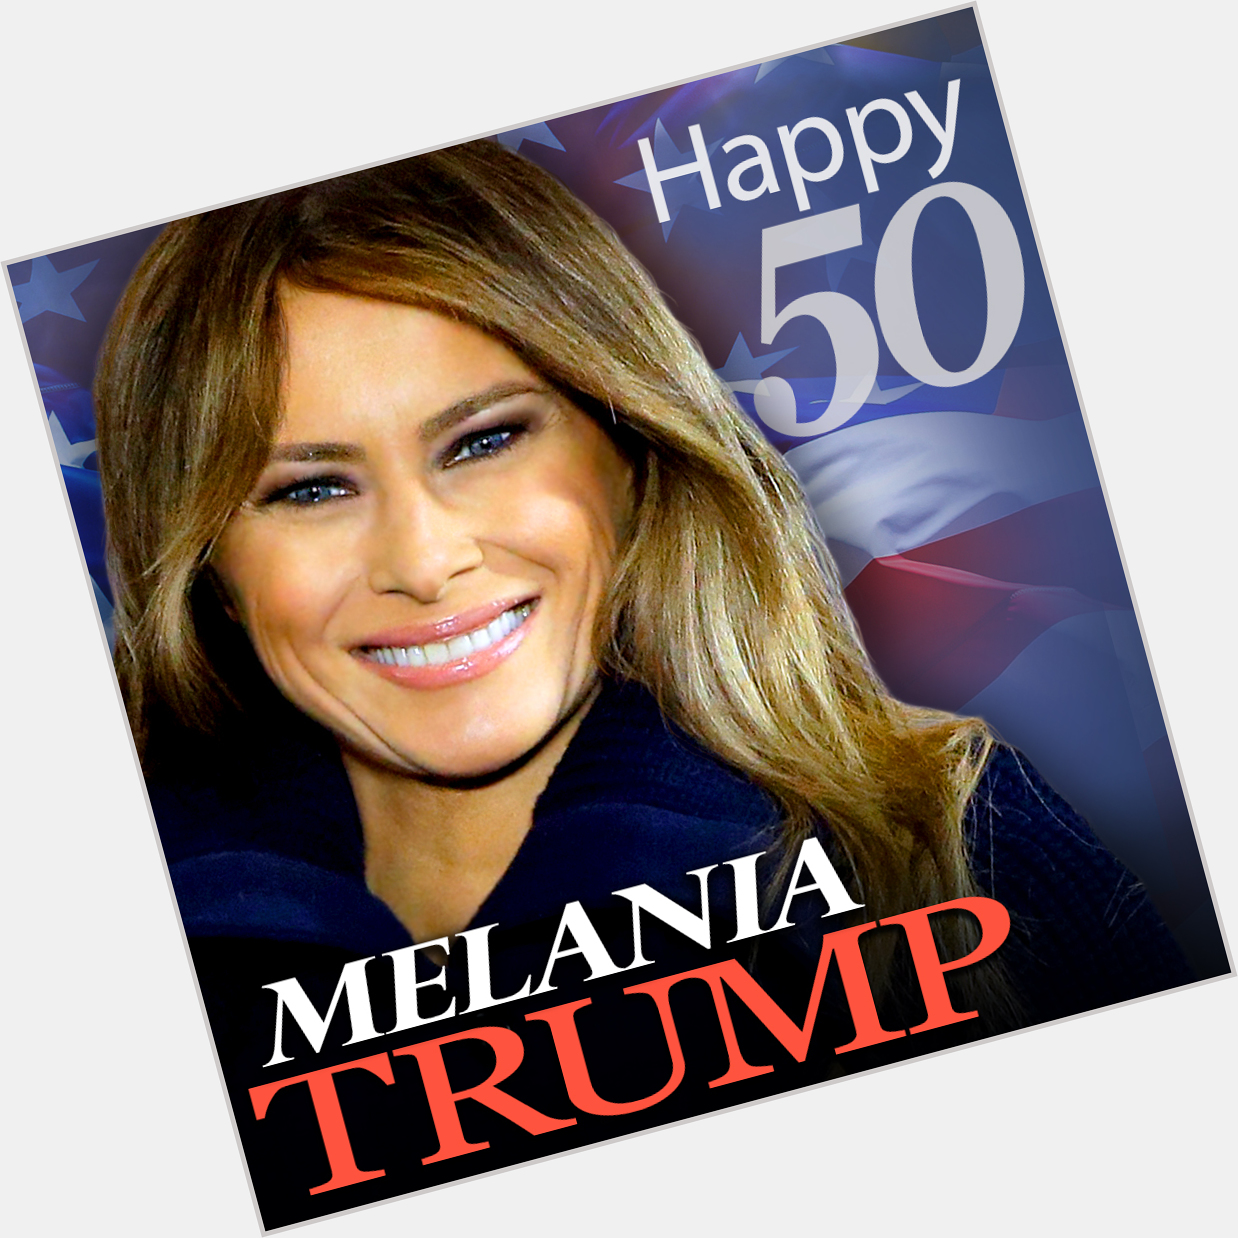 HAPPY BIRTHDAY! Join us in wishing first lady Melania Trump a happy 50th birthday today! 